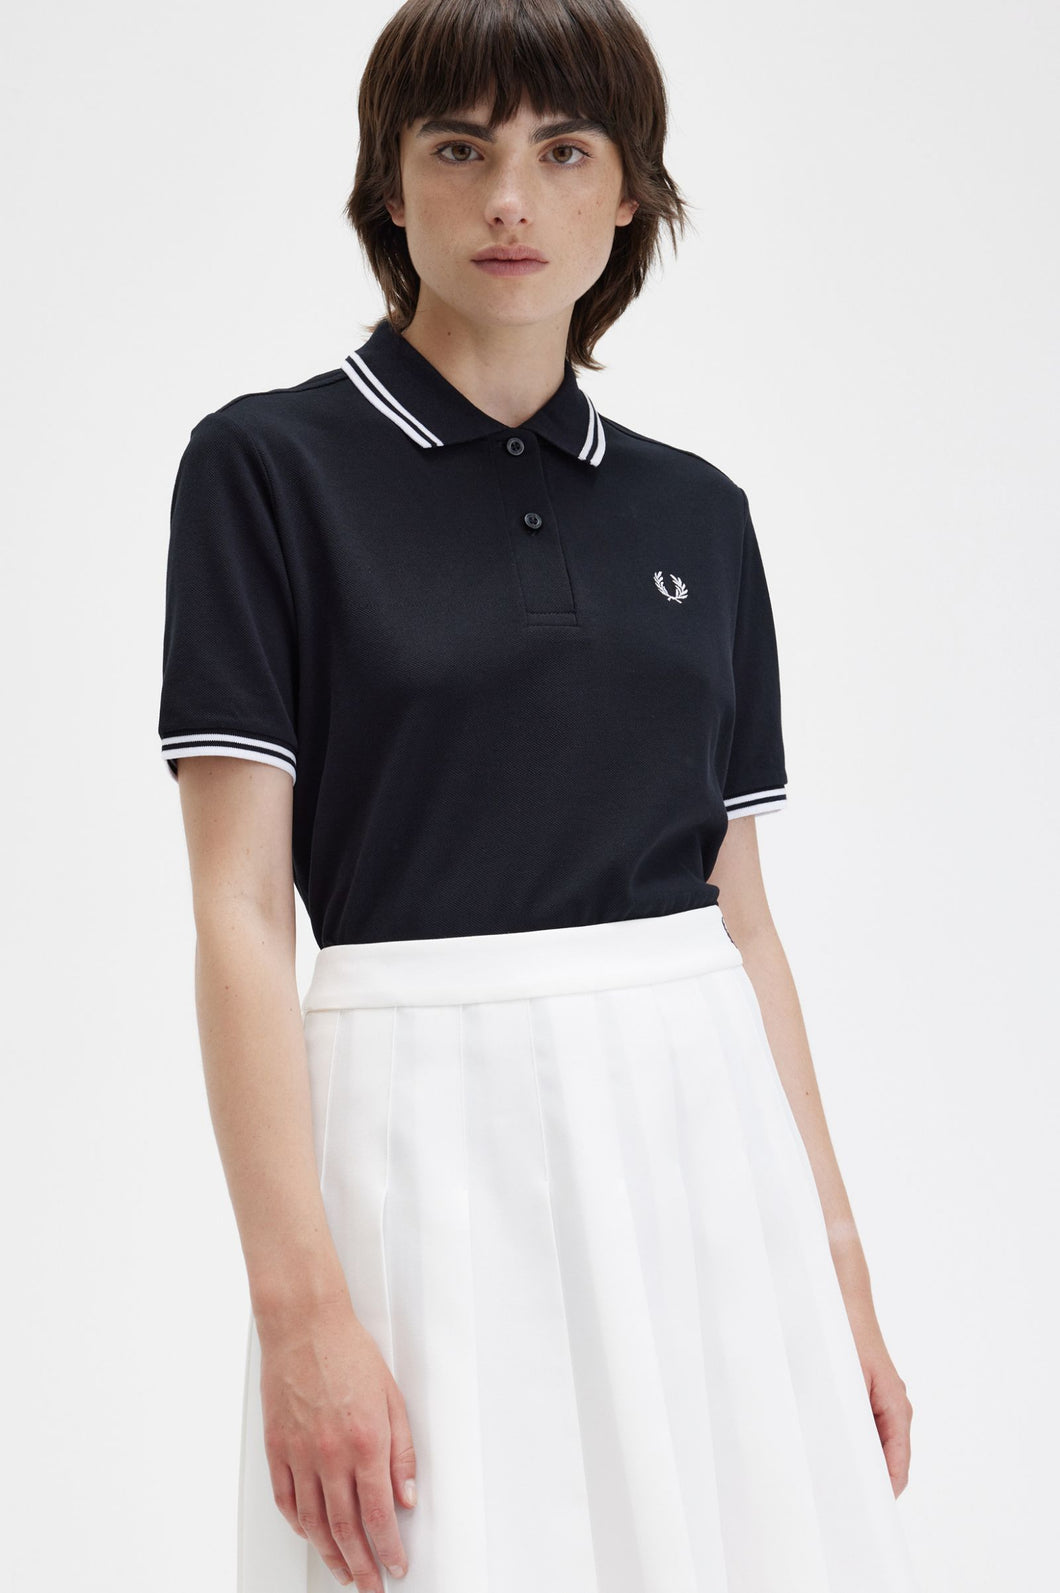 Fred Perry Ladies Black Polo with White Tipping